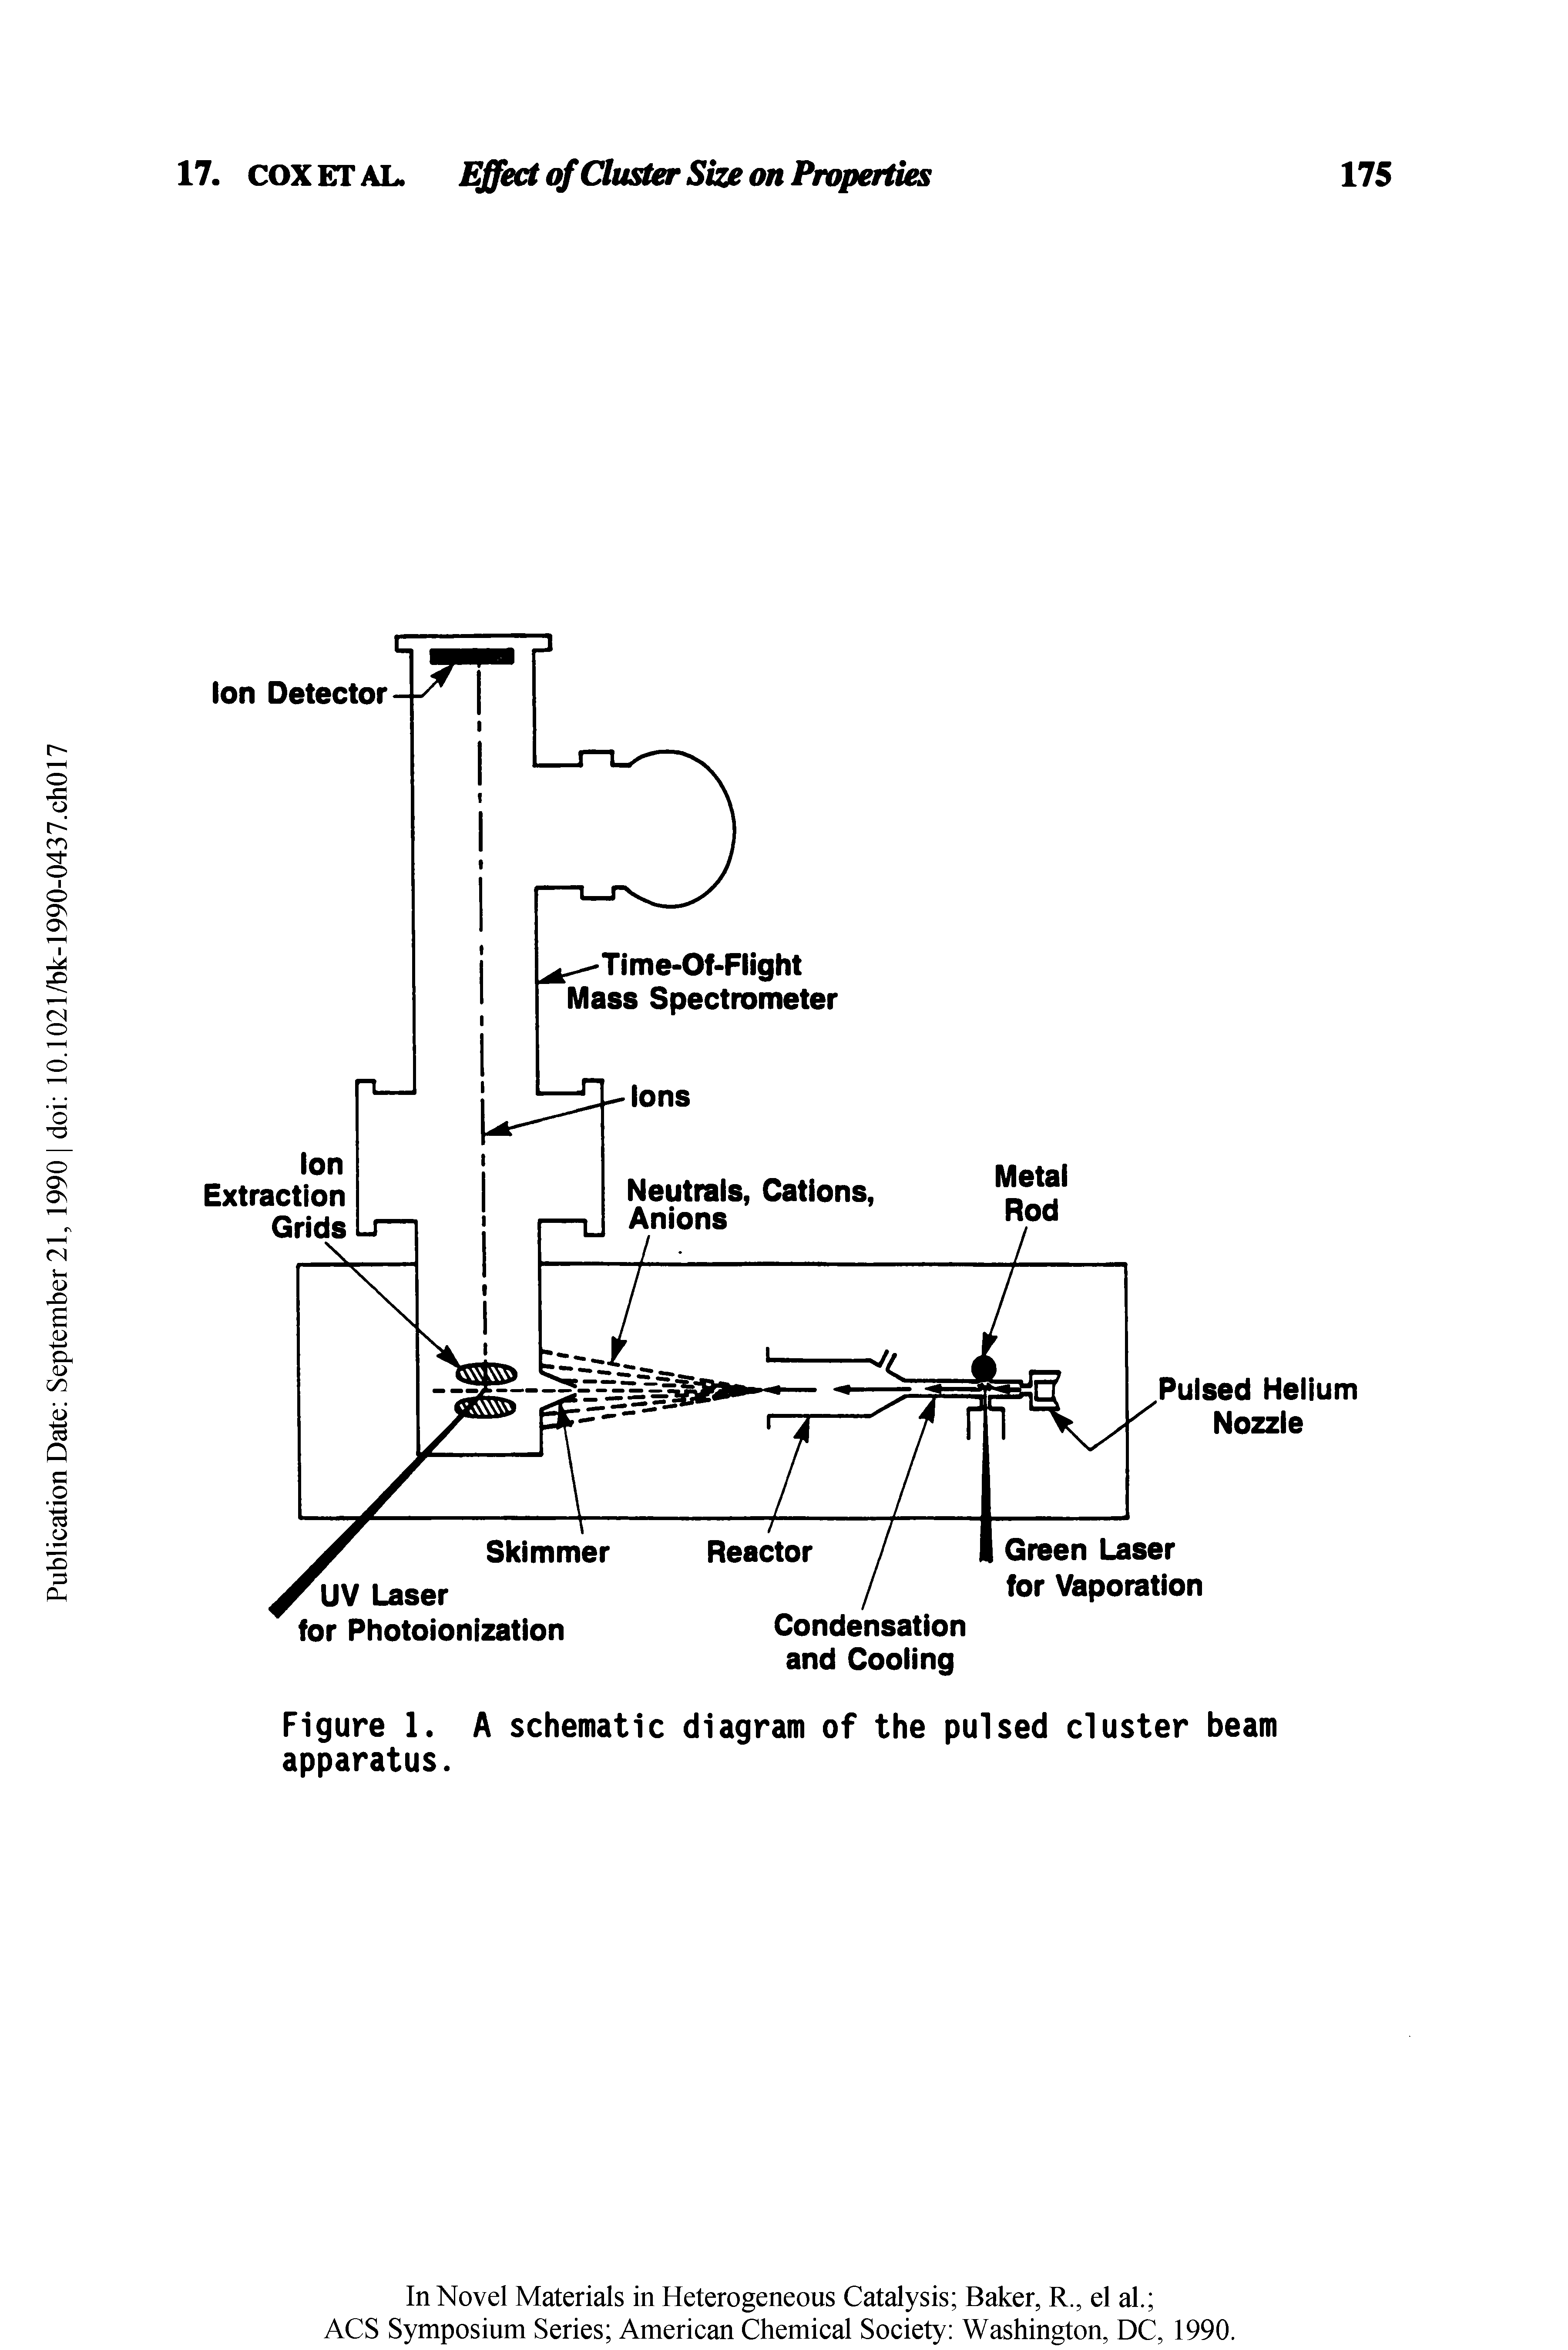 Figure 1. A schematic diagram of the pulsed cluster beam apparatus.